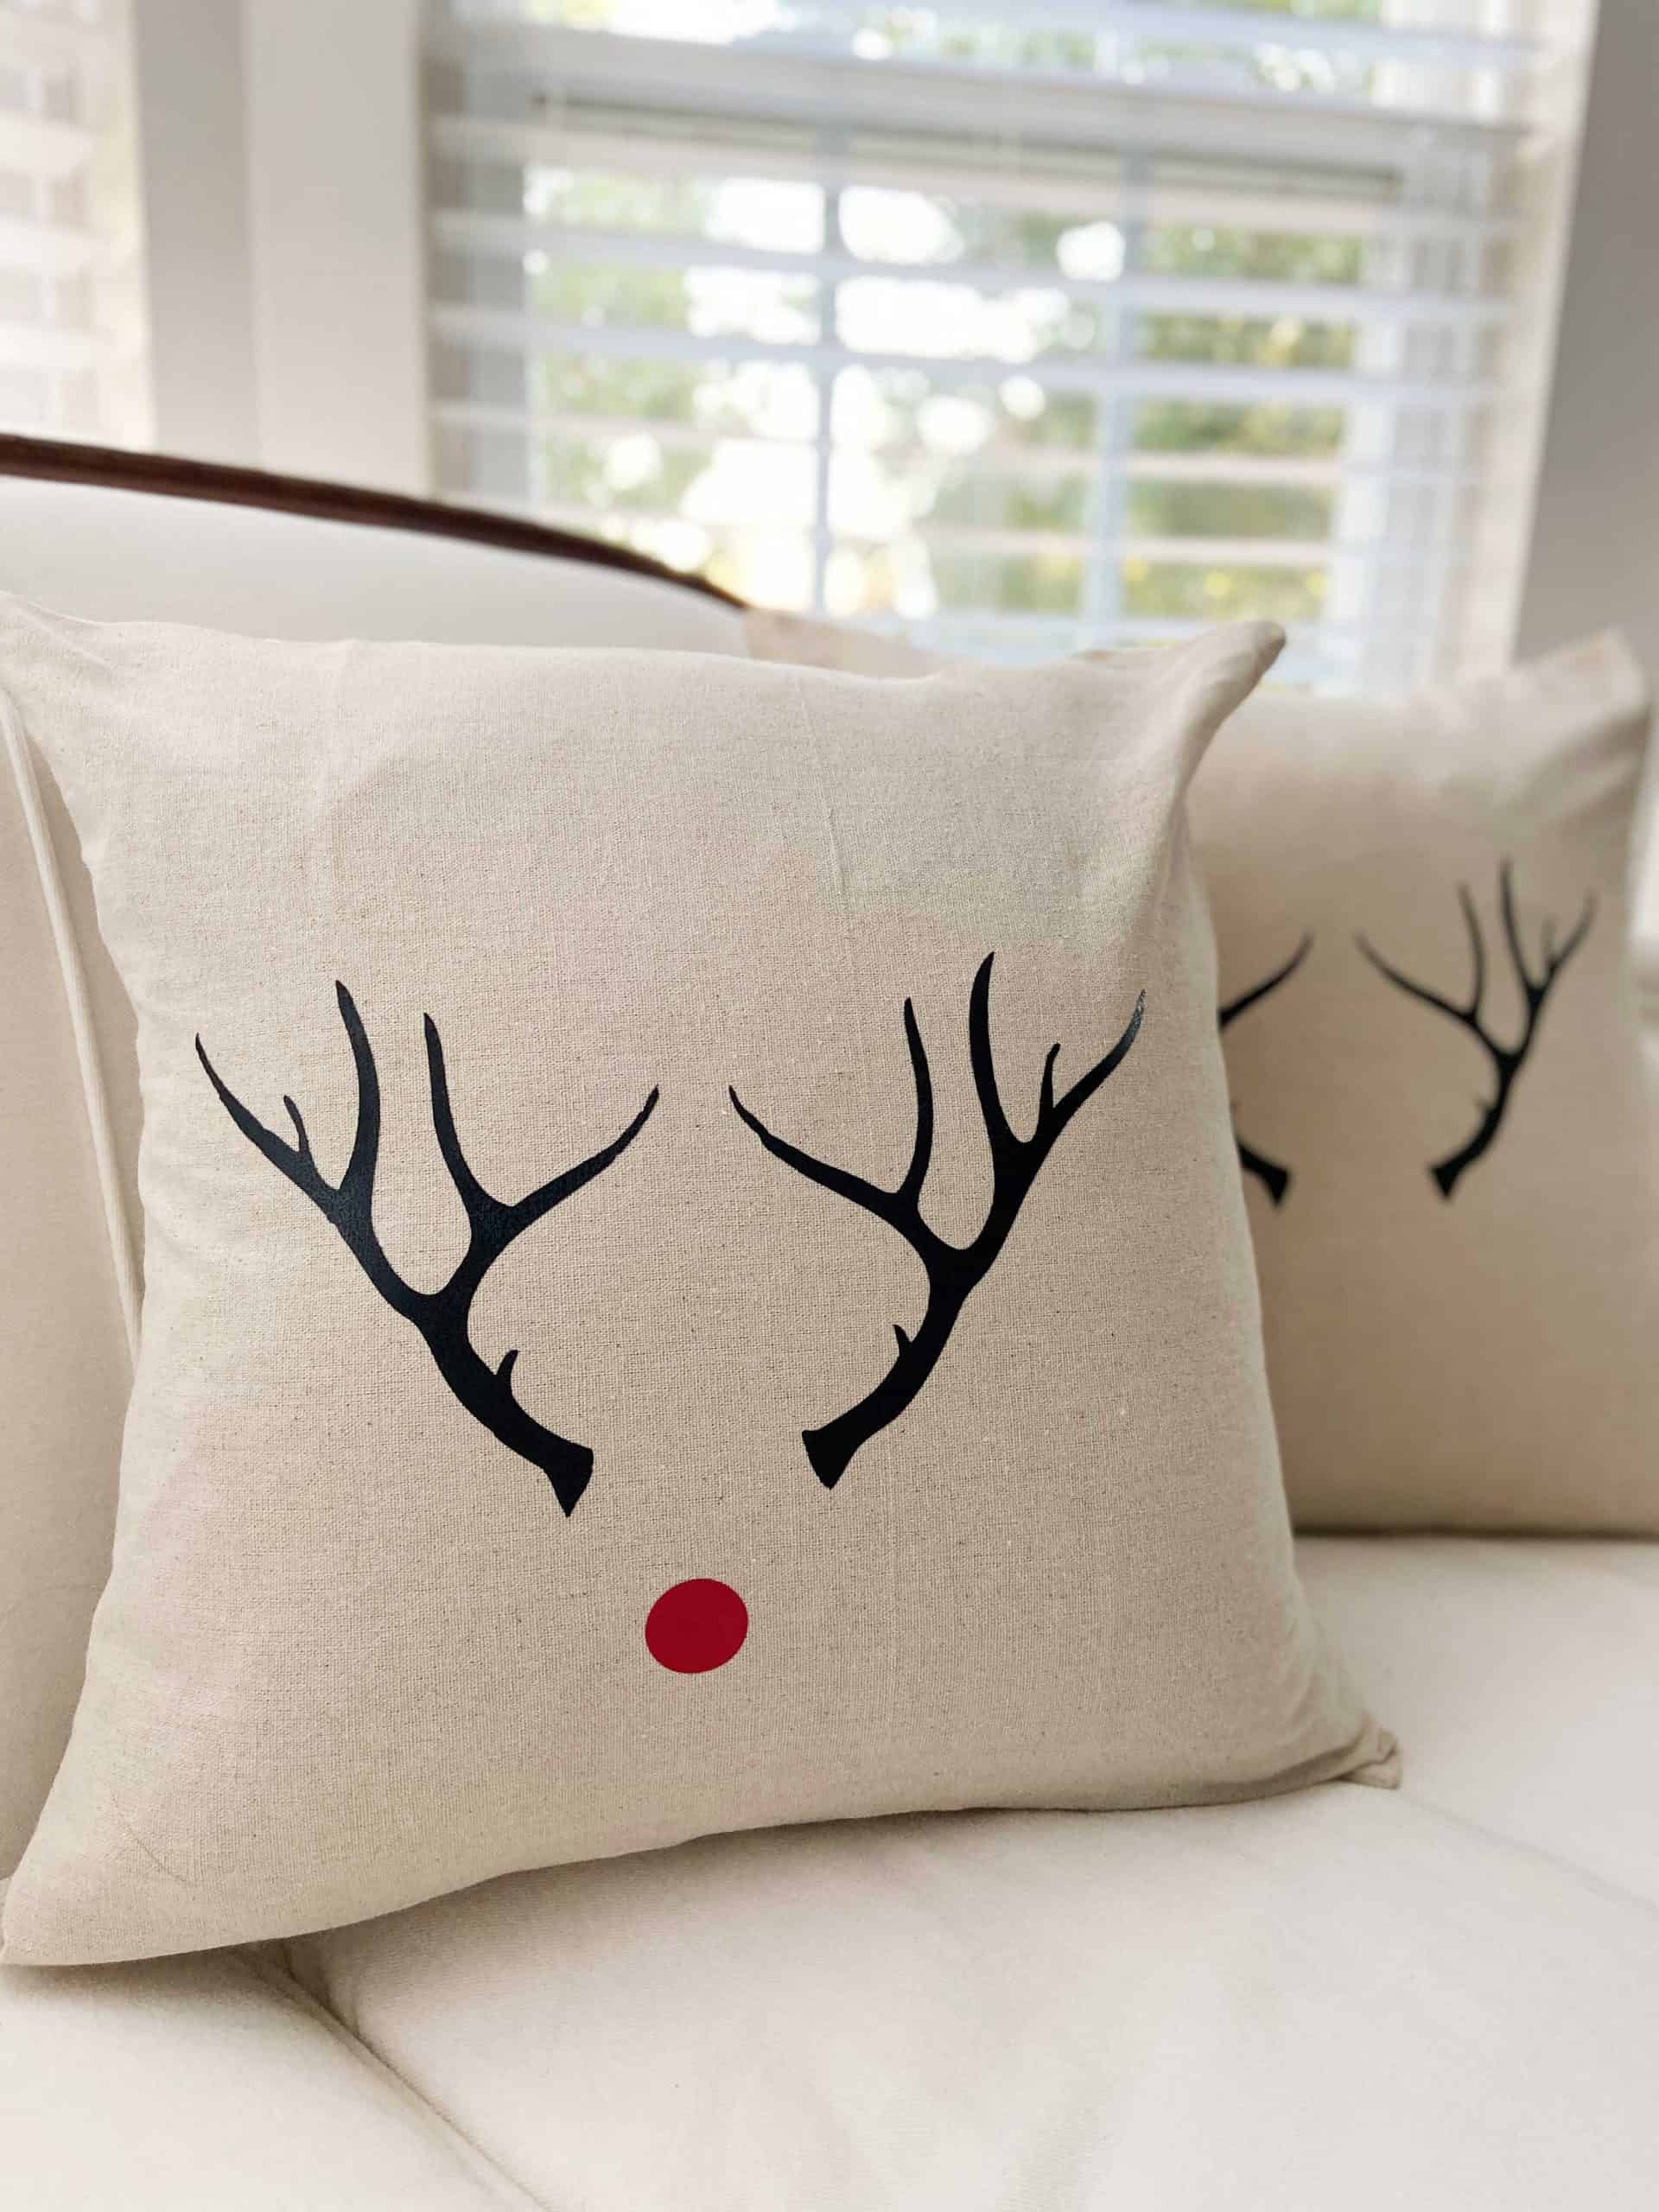 DIY Pressing Pillows for Use with Iron On and the Cricut Easy